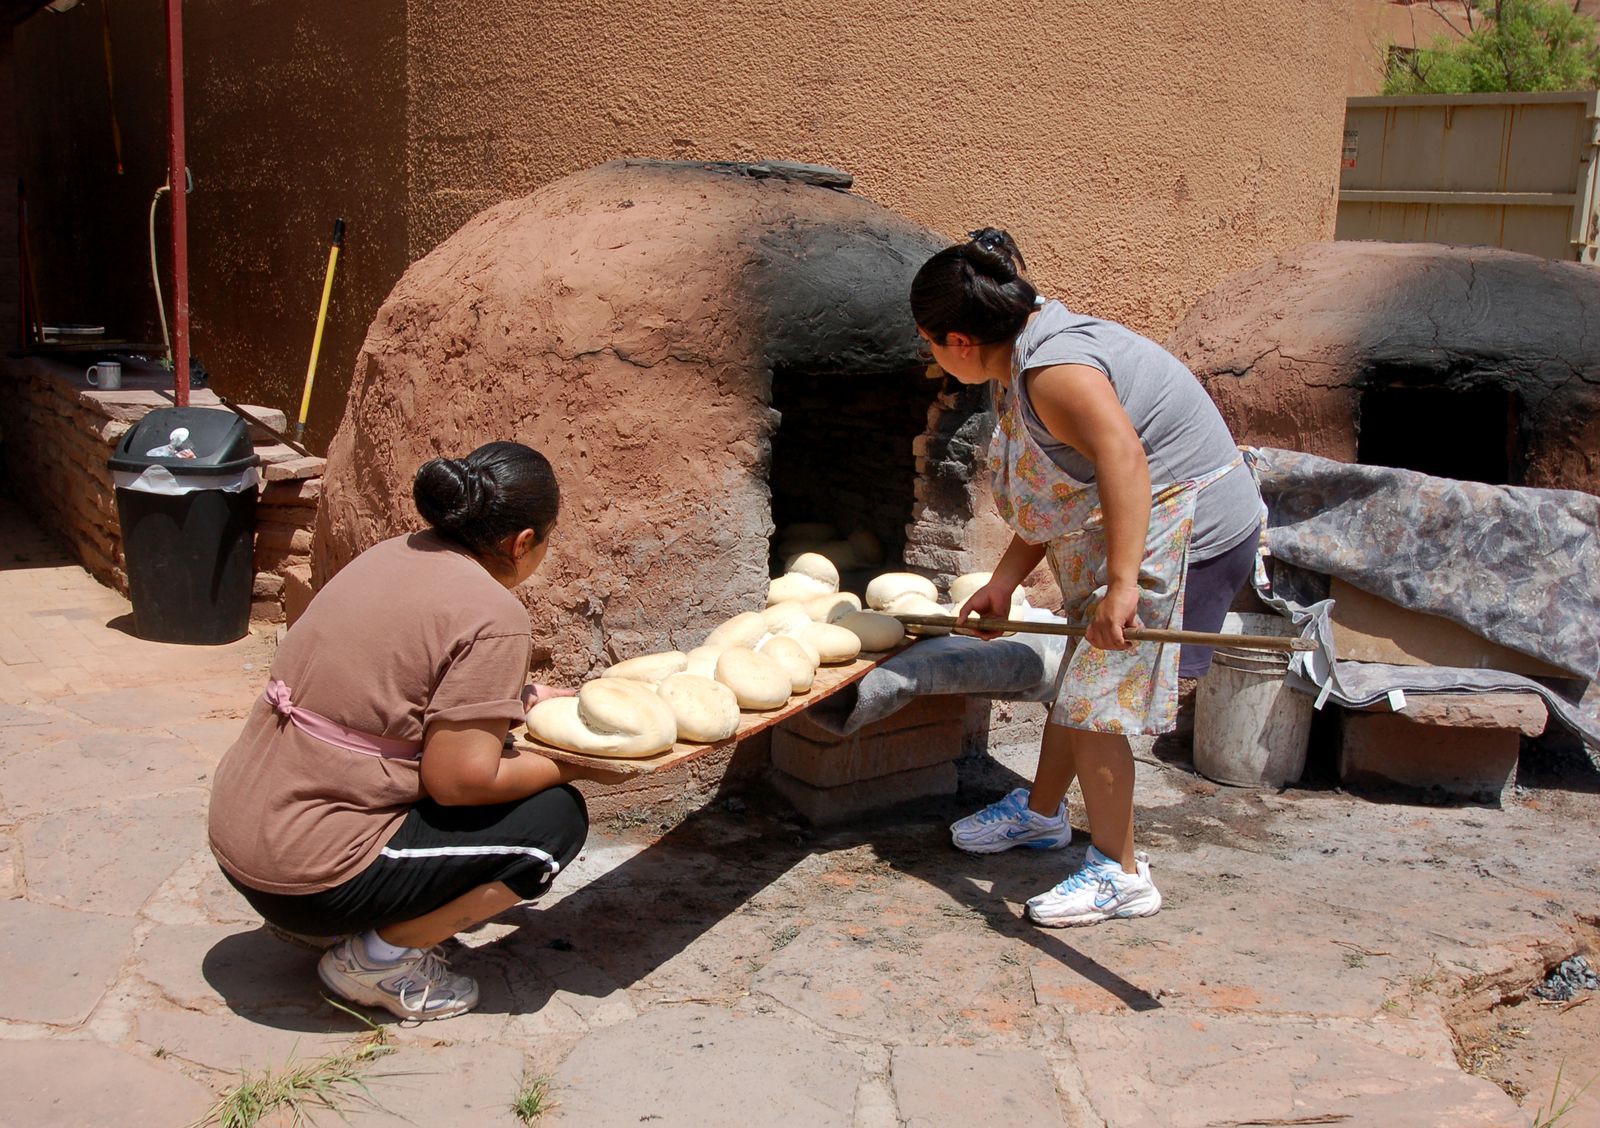 When Will Native American Food Finally Get Its Due?